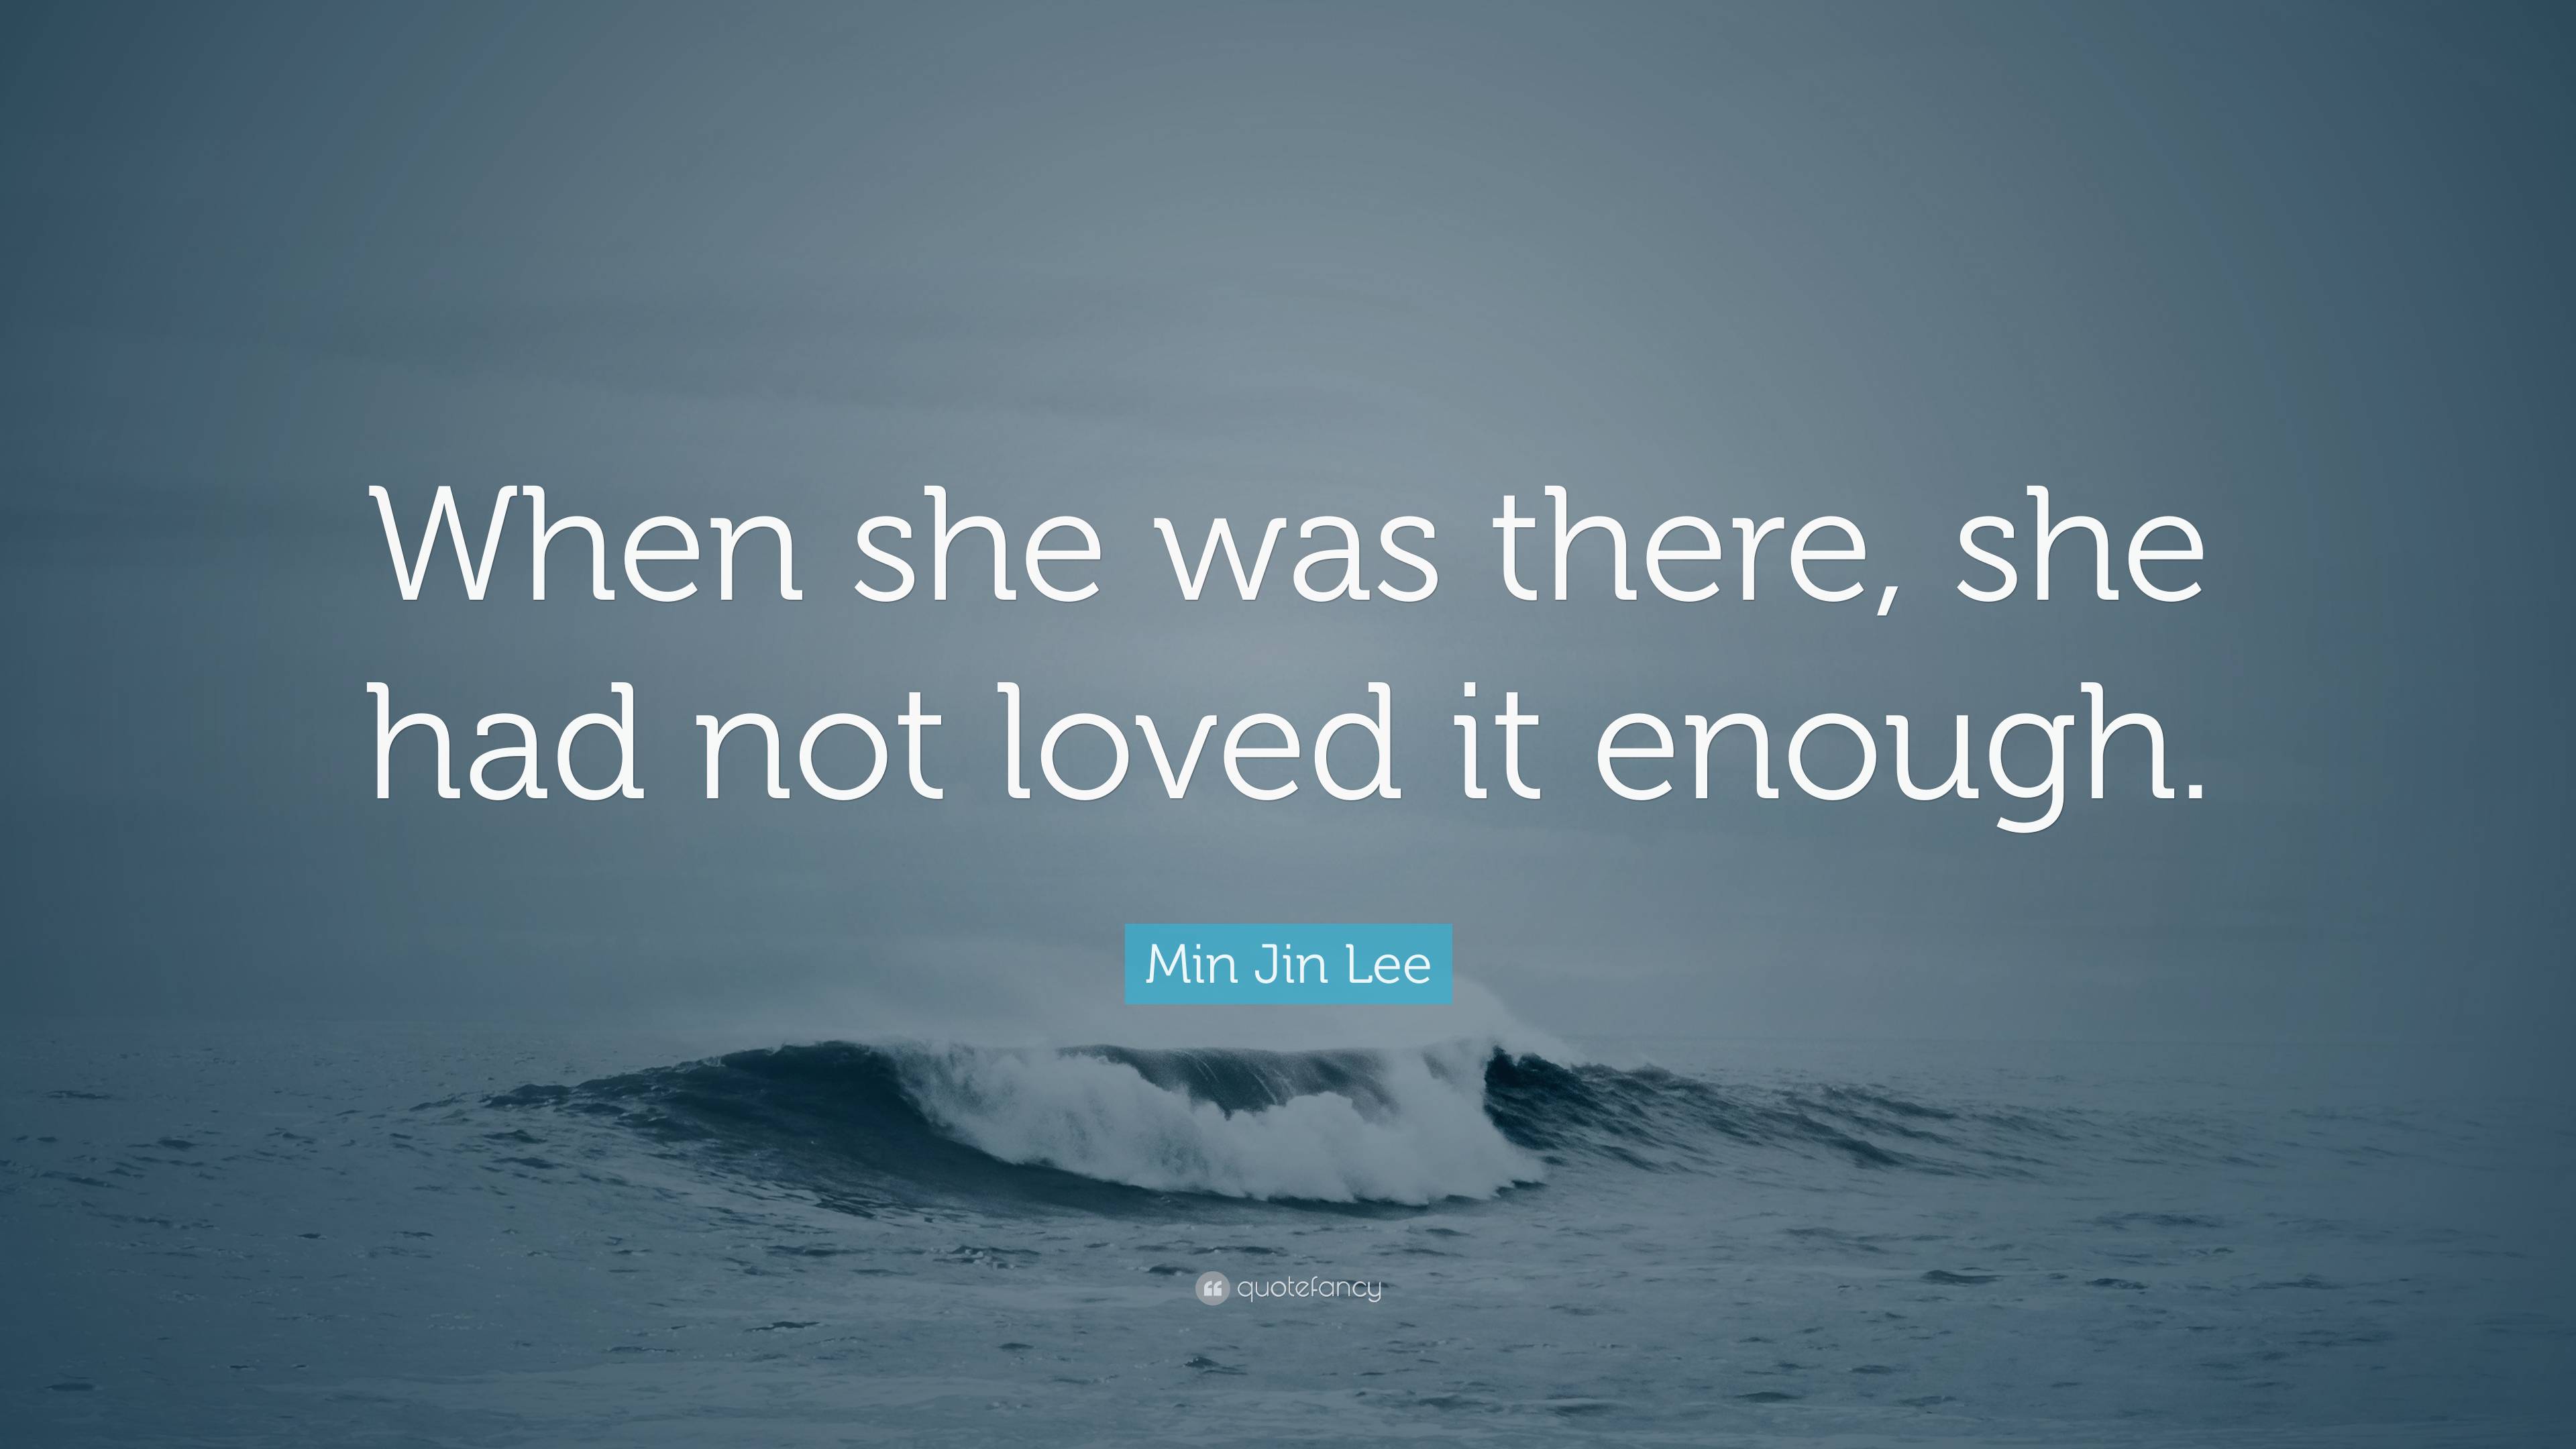 Min Jin Lee Quote: “When she was there, she had not loved it enough.”